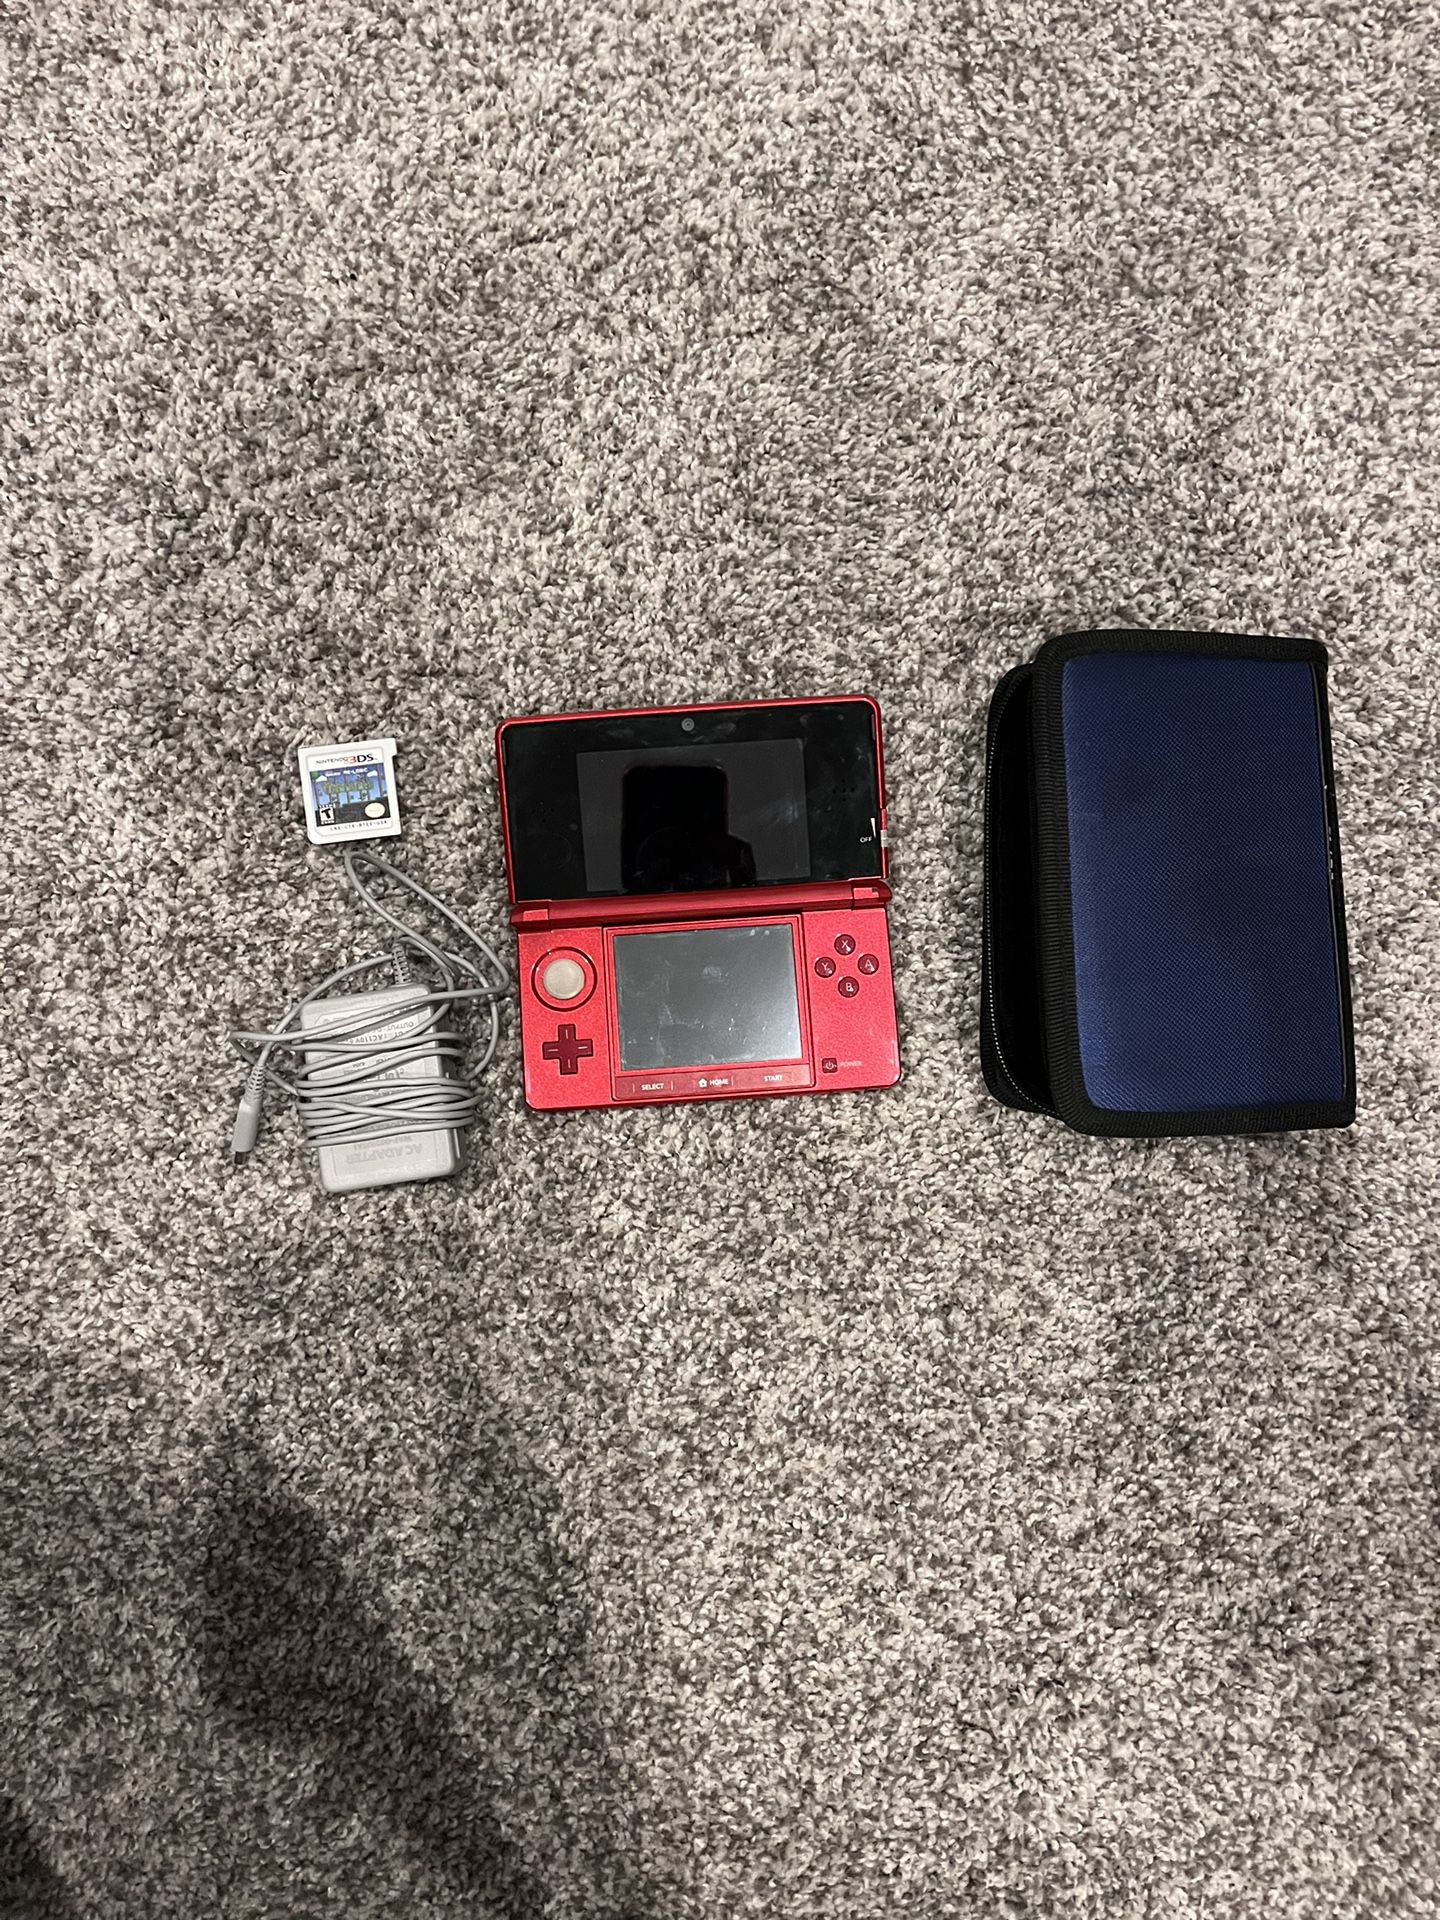 Nintendo 3DS With 1 Game